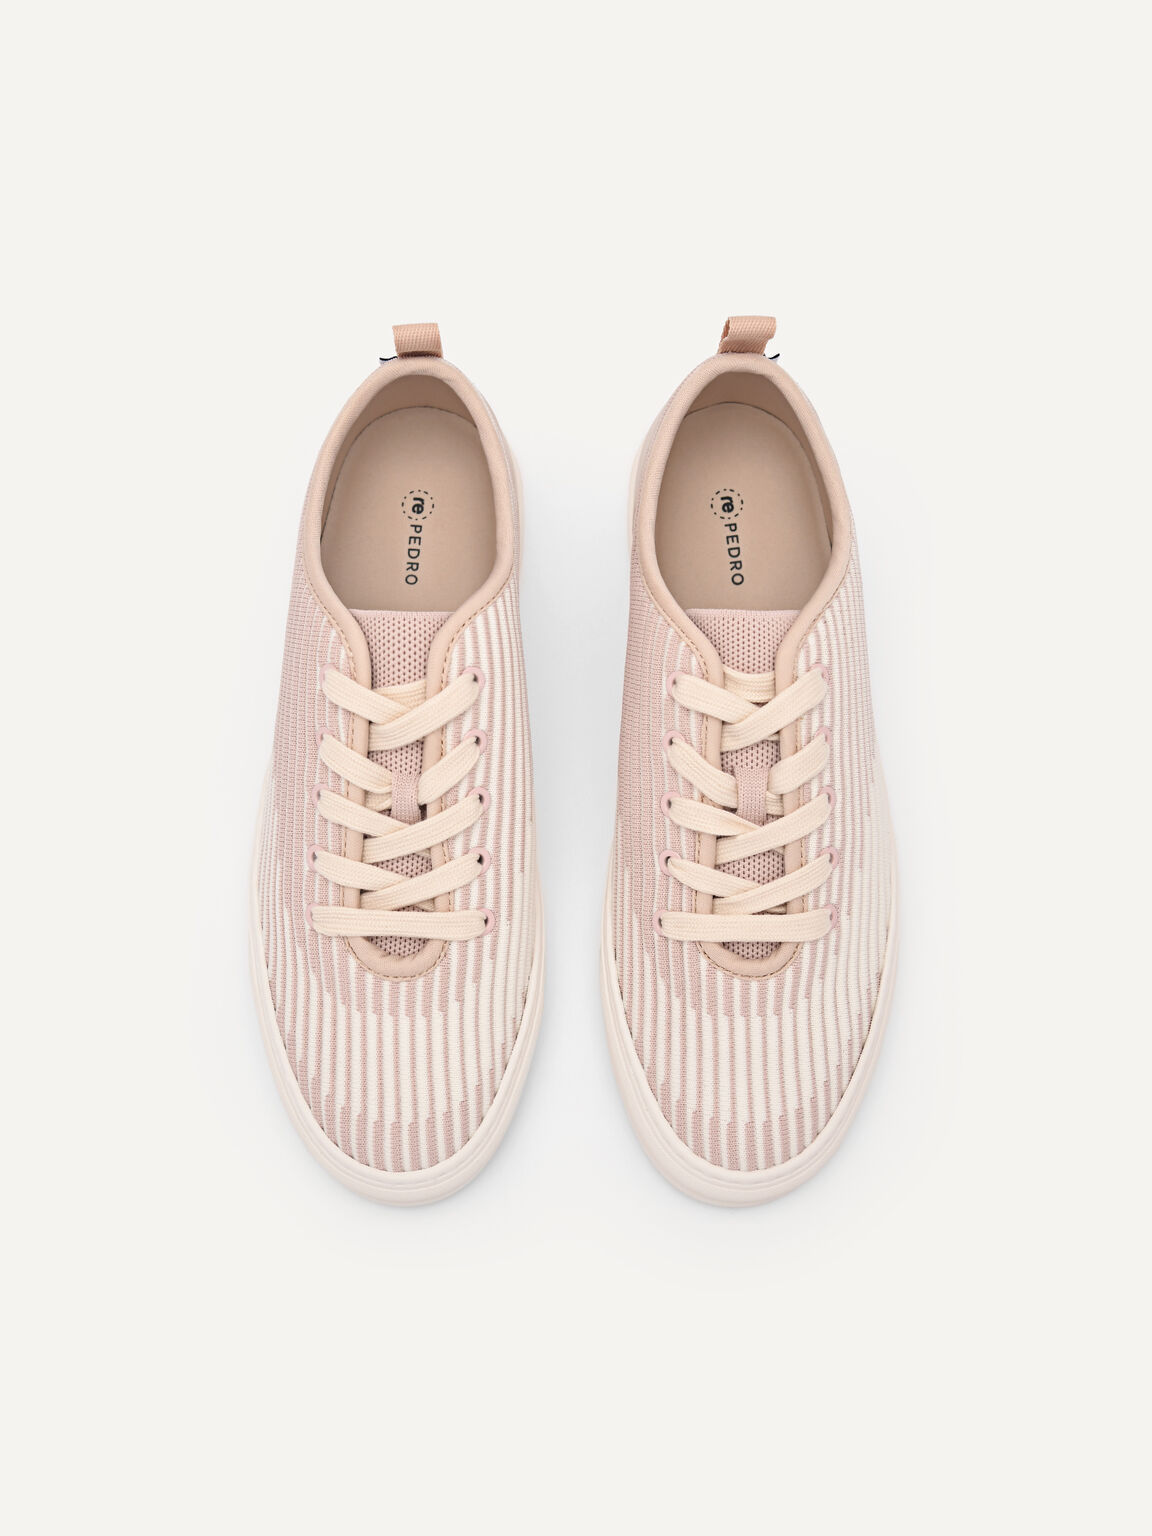 rePEDRO Pleated Court Sneakers, Nude